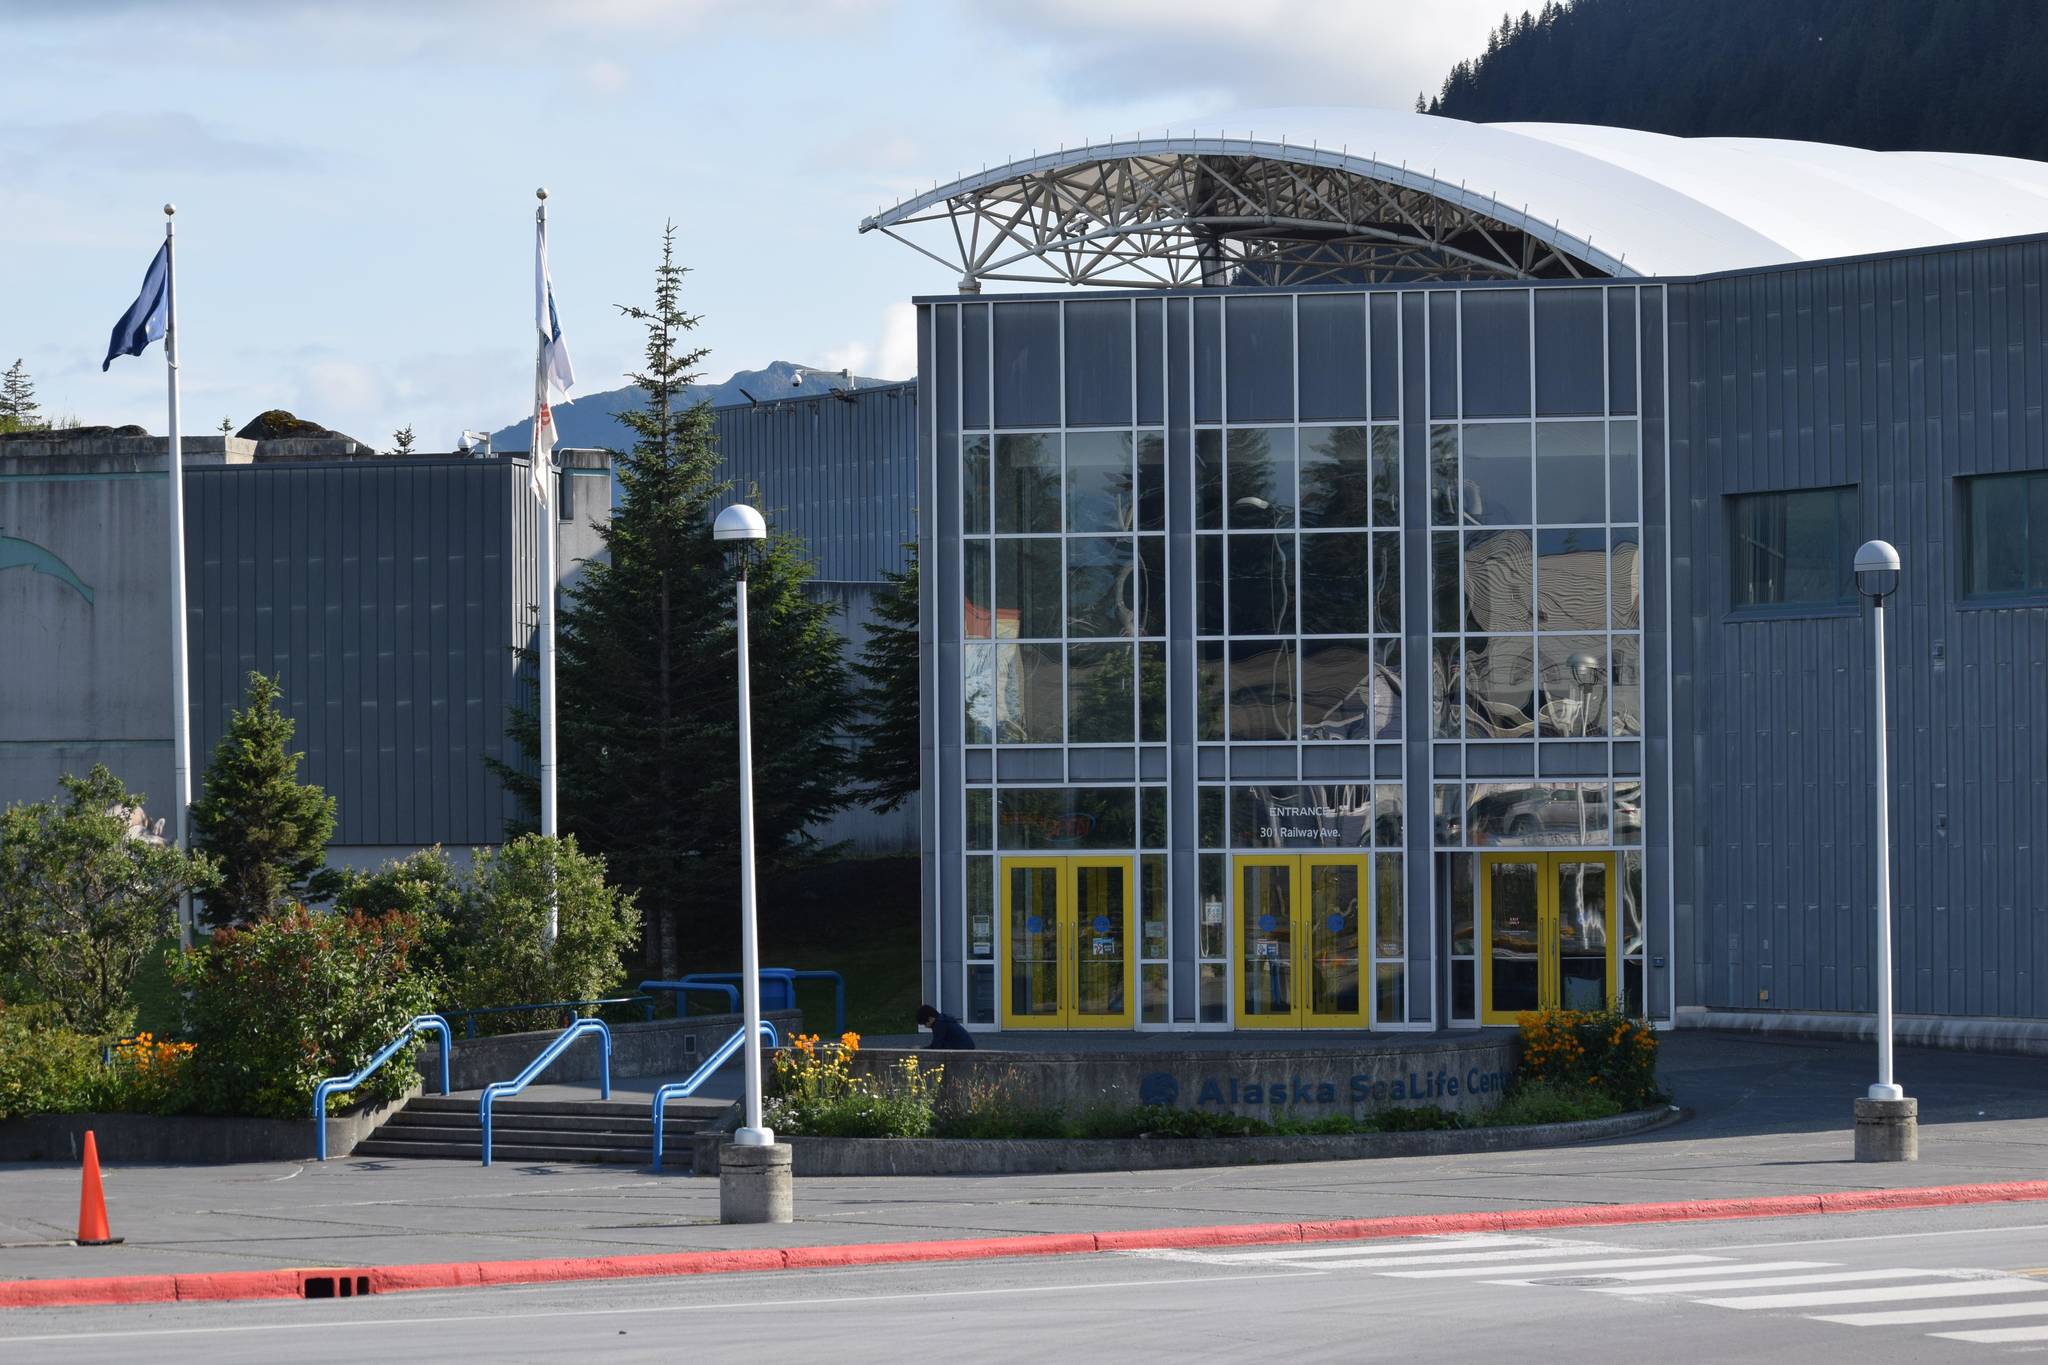 The Alaska SeaLife Center in downtown Seward is seen on Saturday, July 24, 2021. (Camille Botello / Peninsula Clarion)